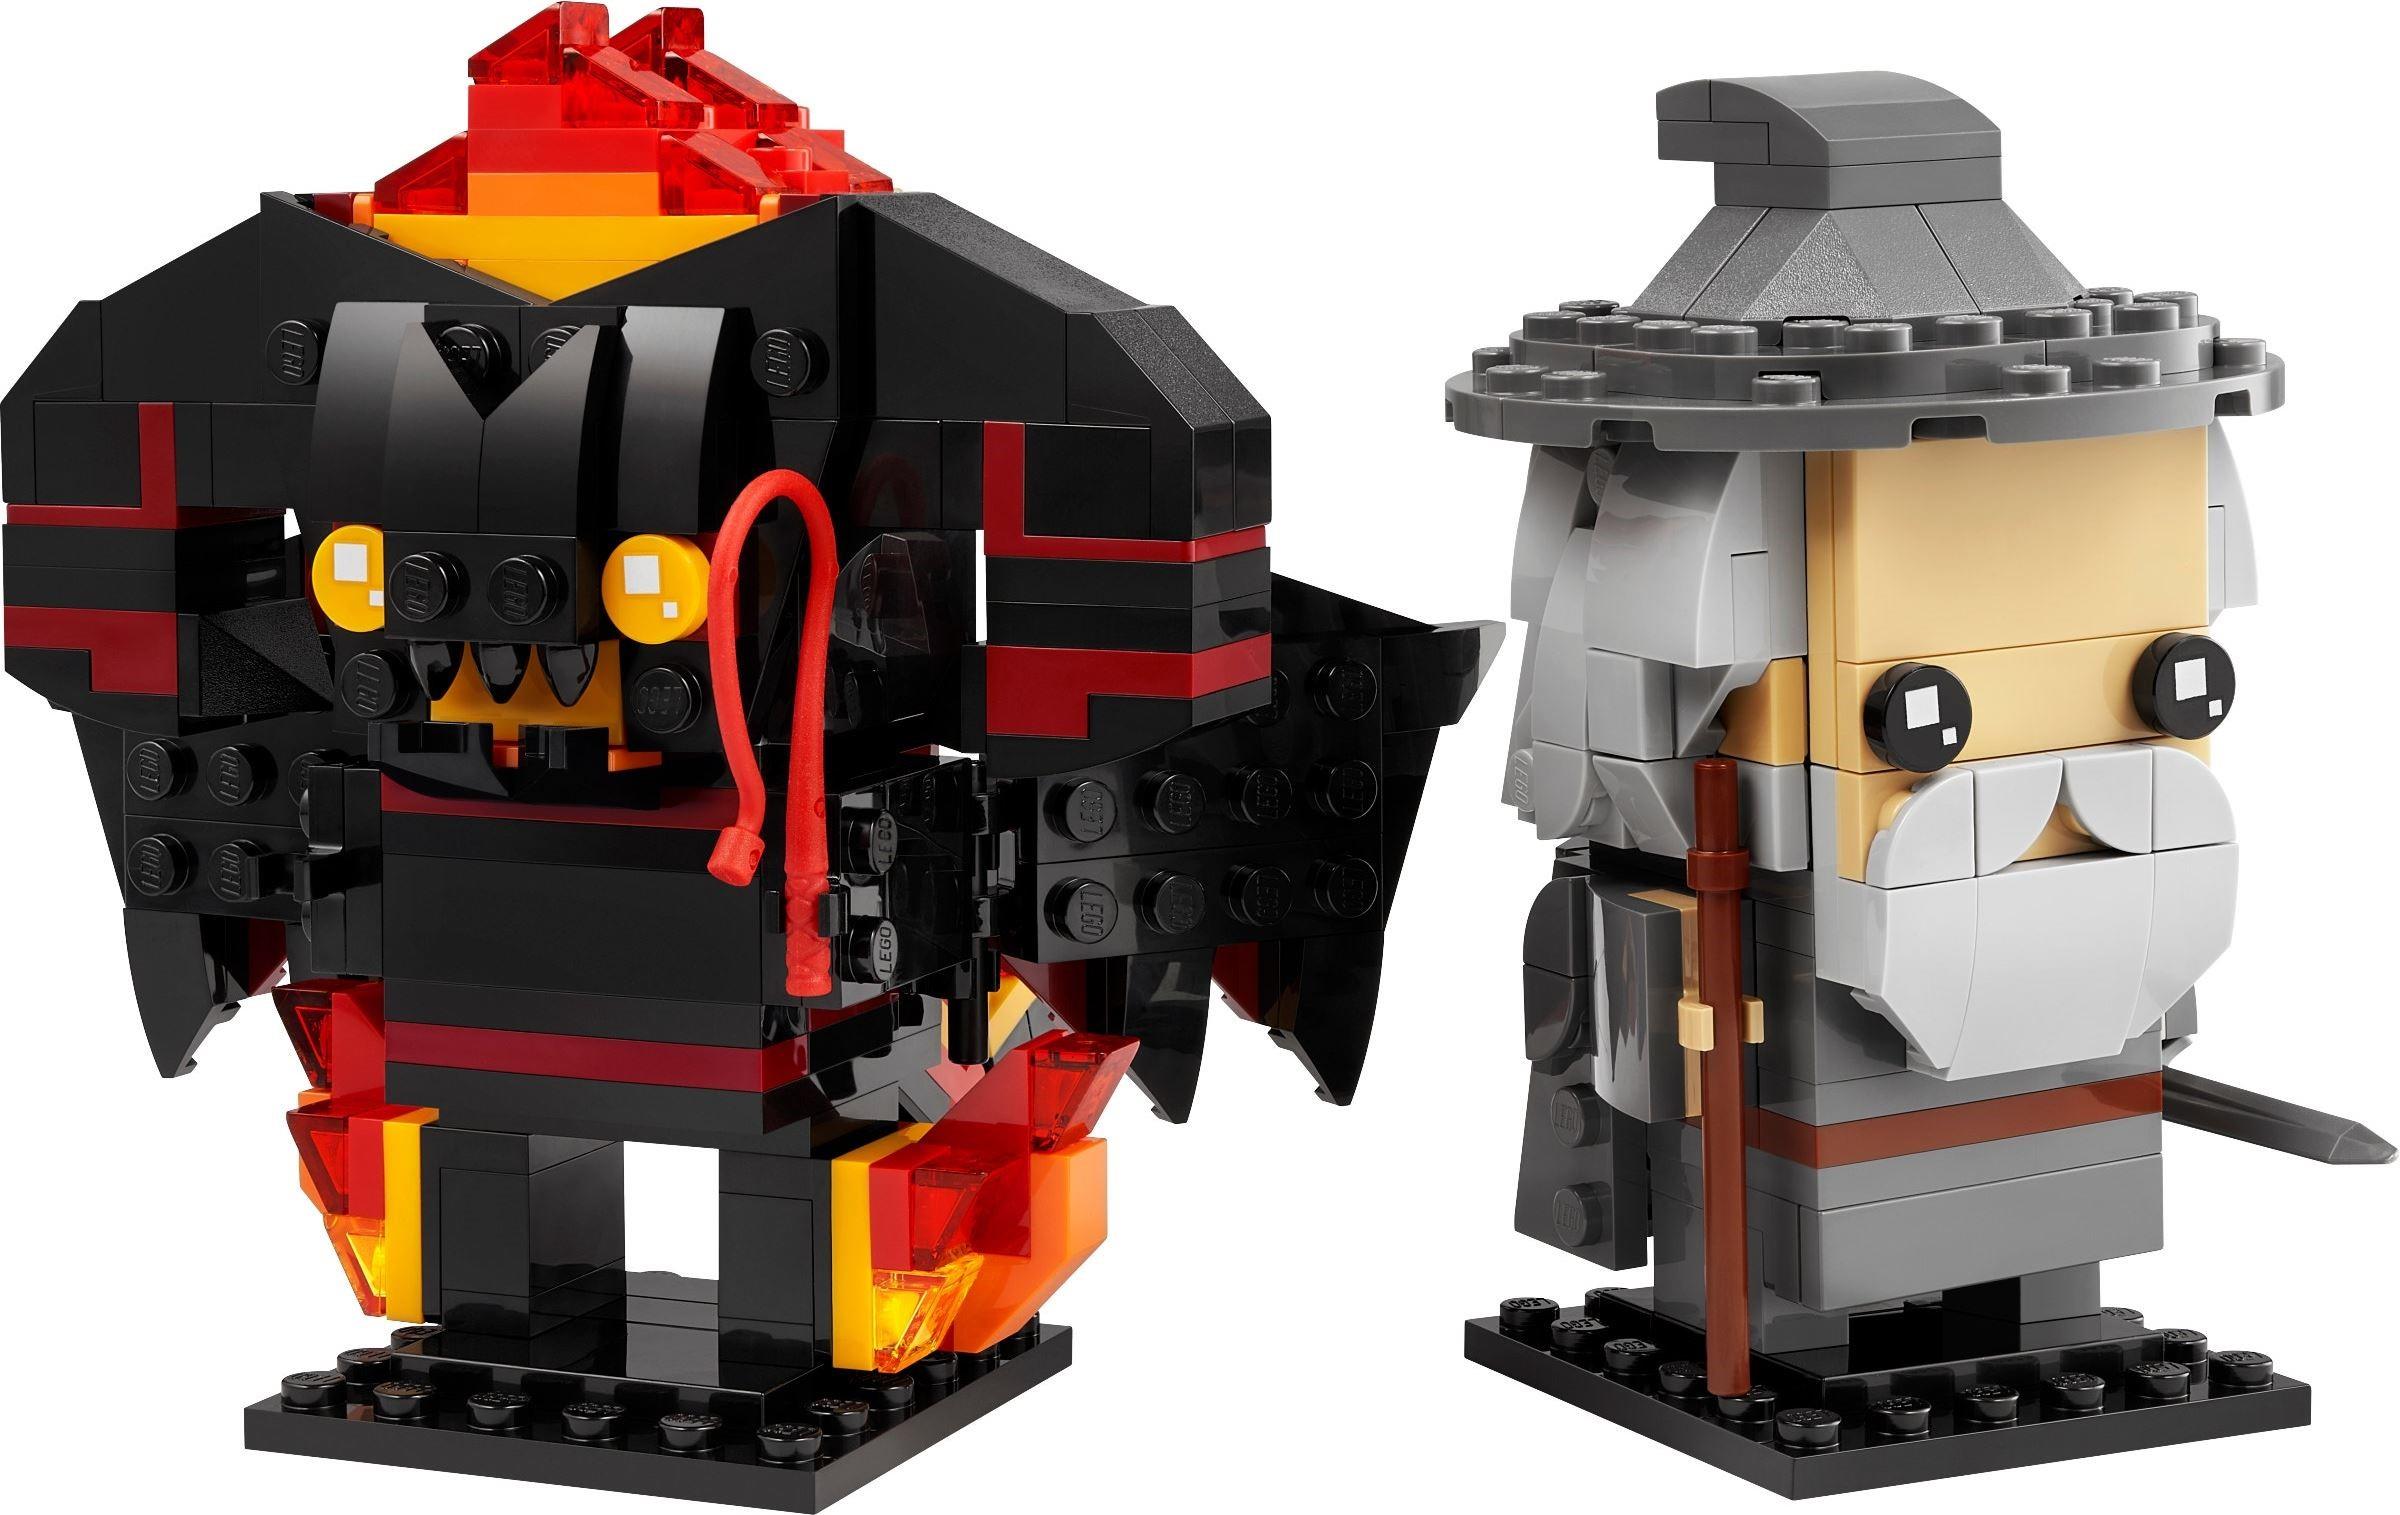 LEGO 40631 BrickHeadz The Lord of the Rings Gandalf the Grey and Balrog